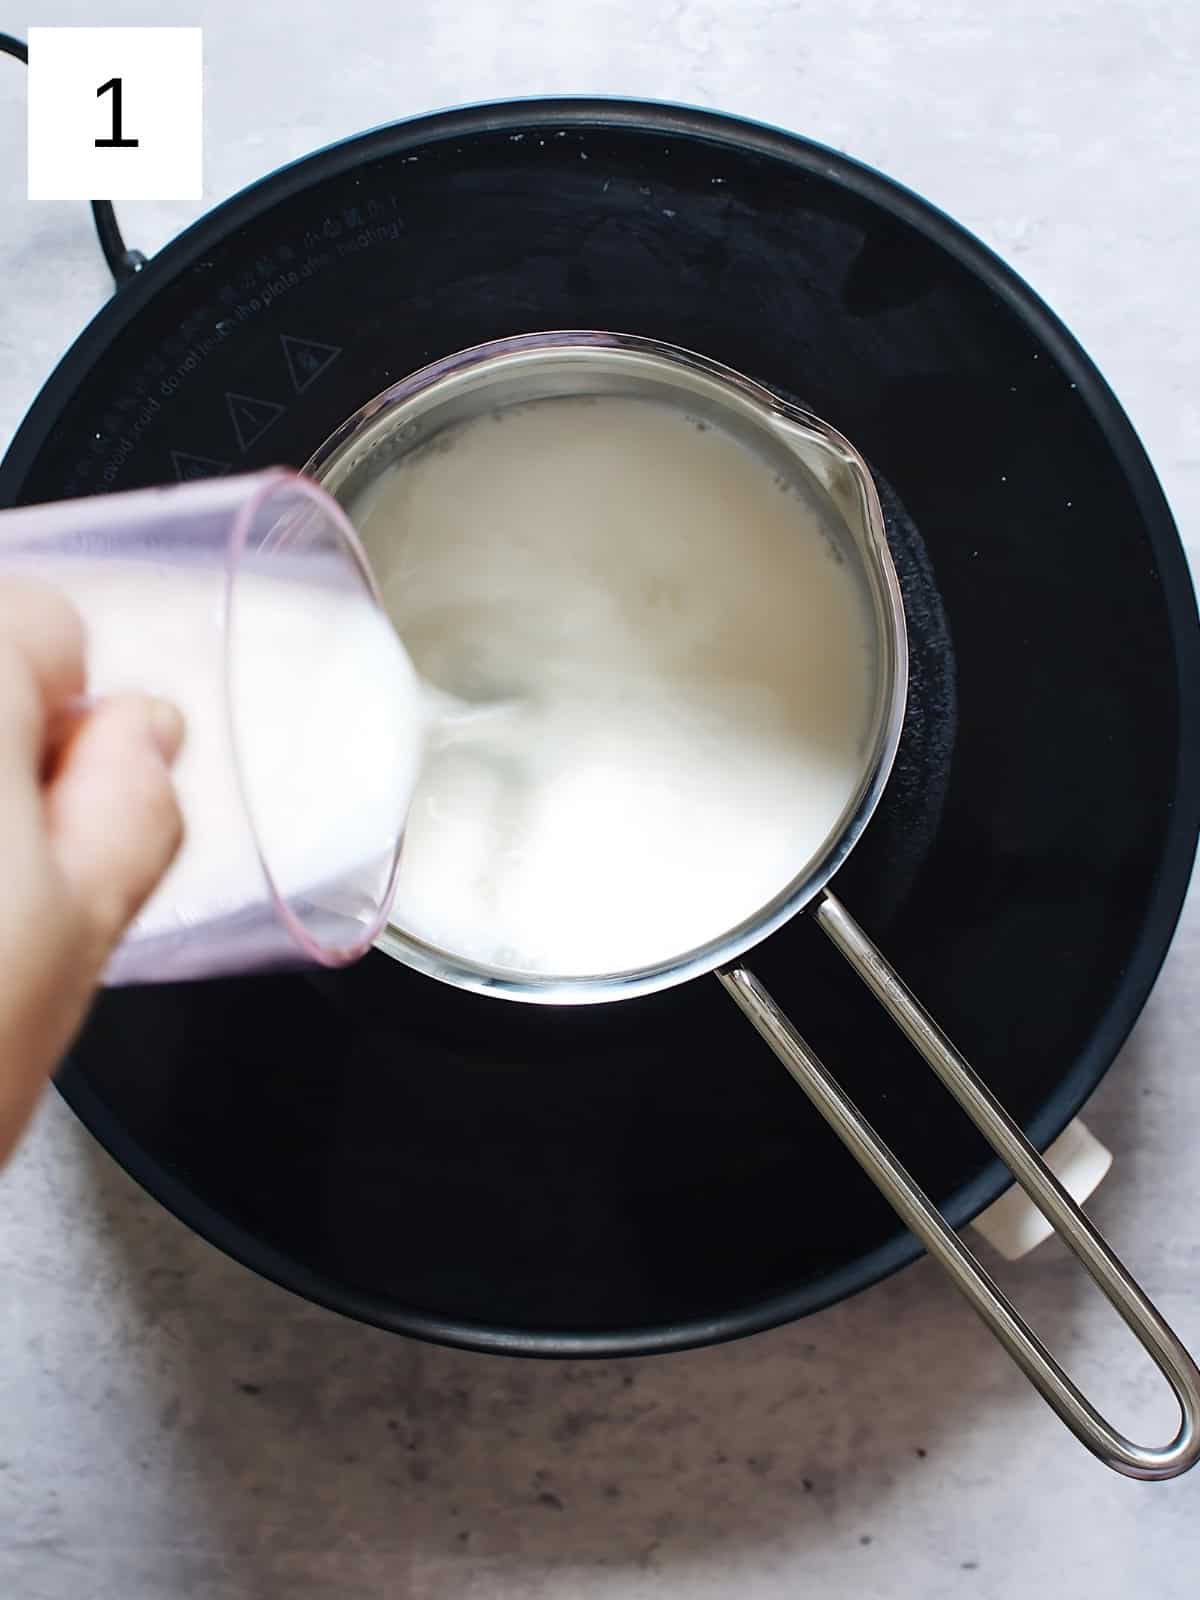 A person pouring milk in a heated pan.